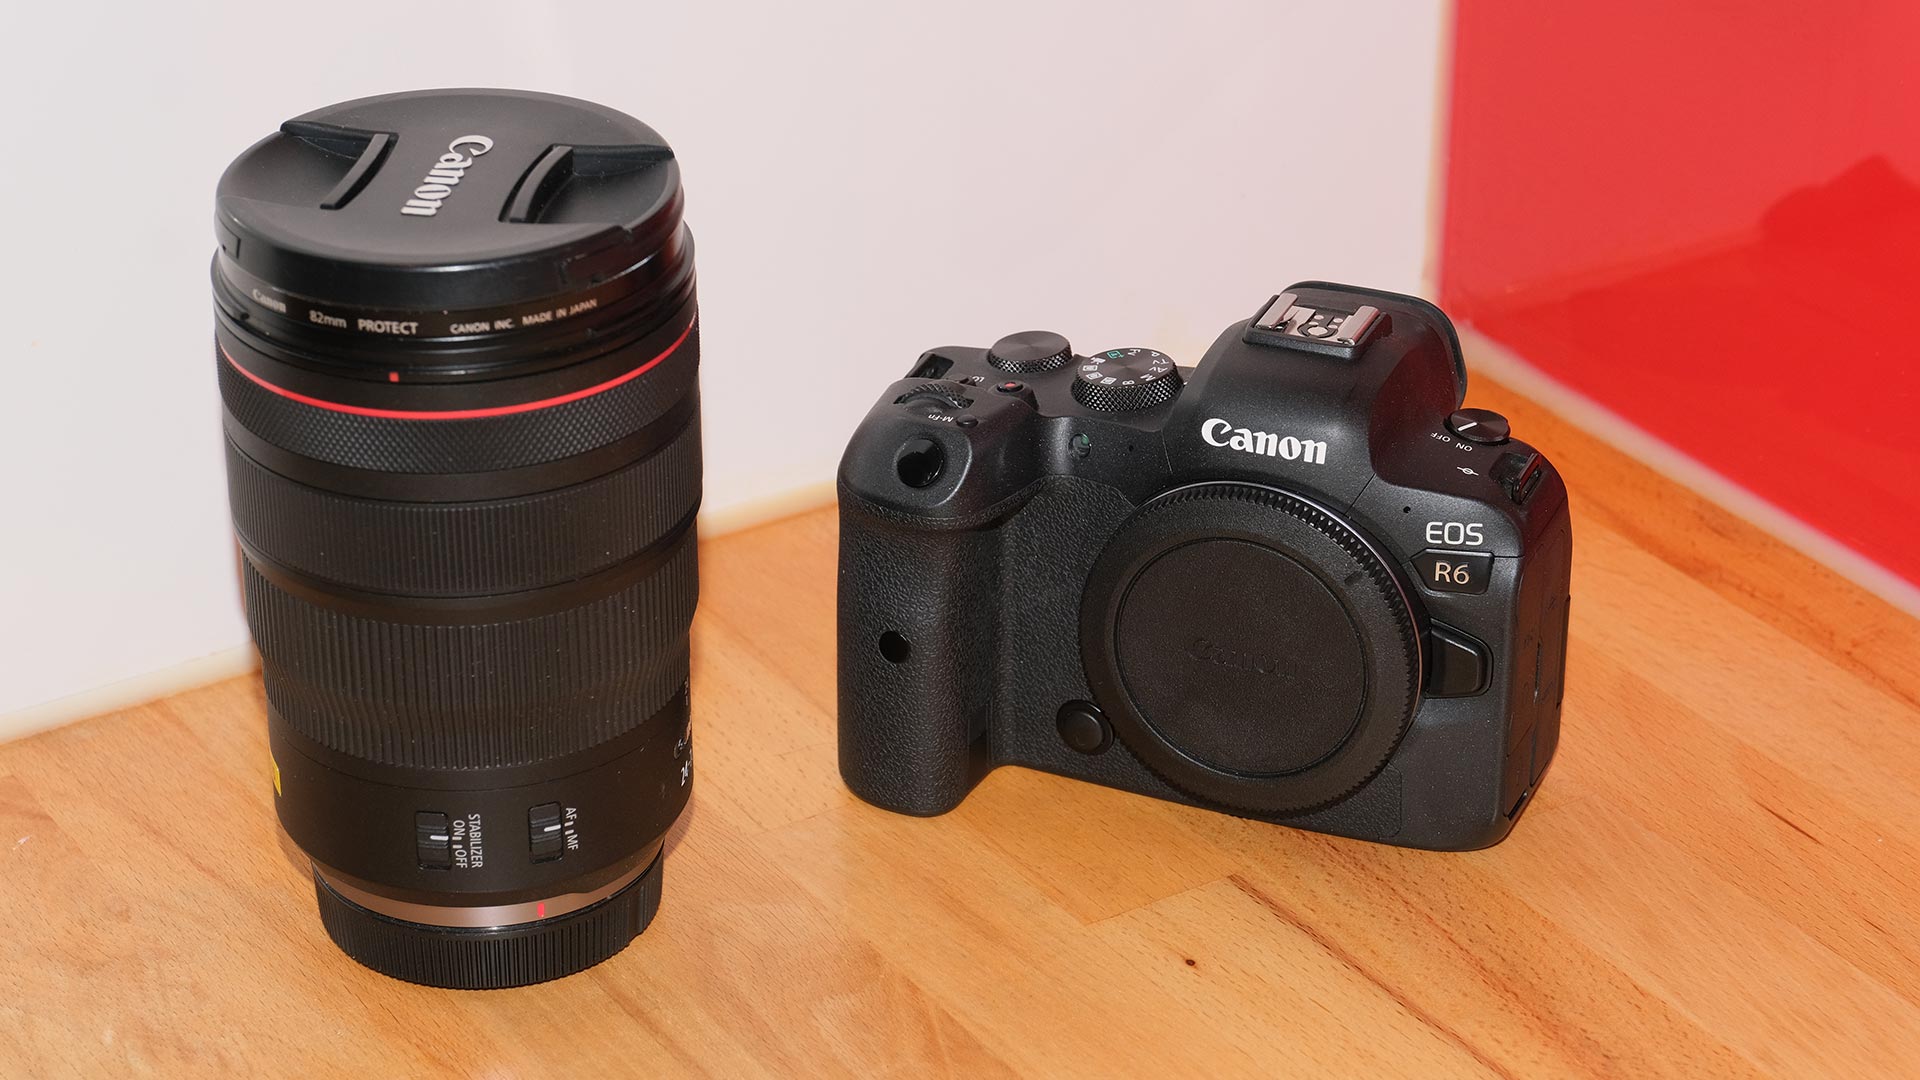 The Canon EOS R6 full-frame mirrorless camera. This shot shows it from the front, with the 27-70mm lens next to it